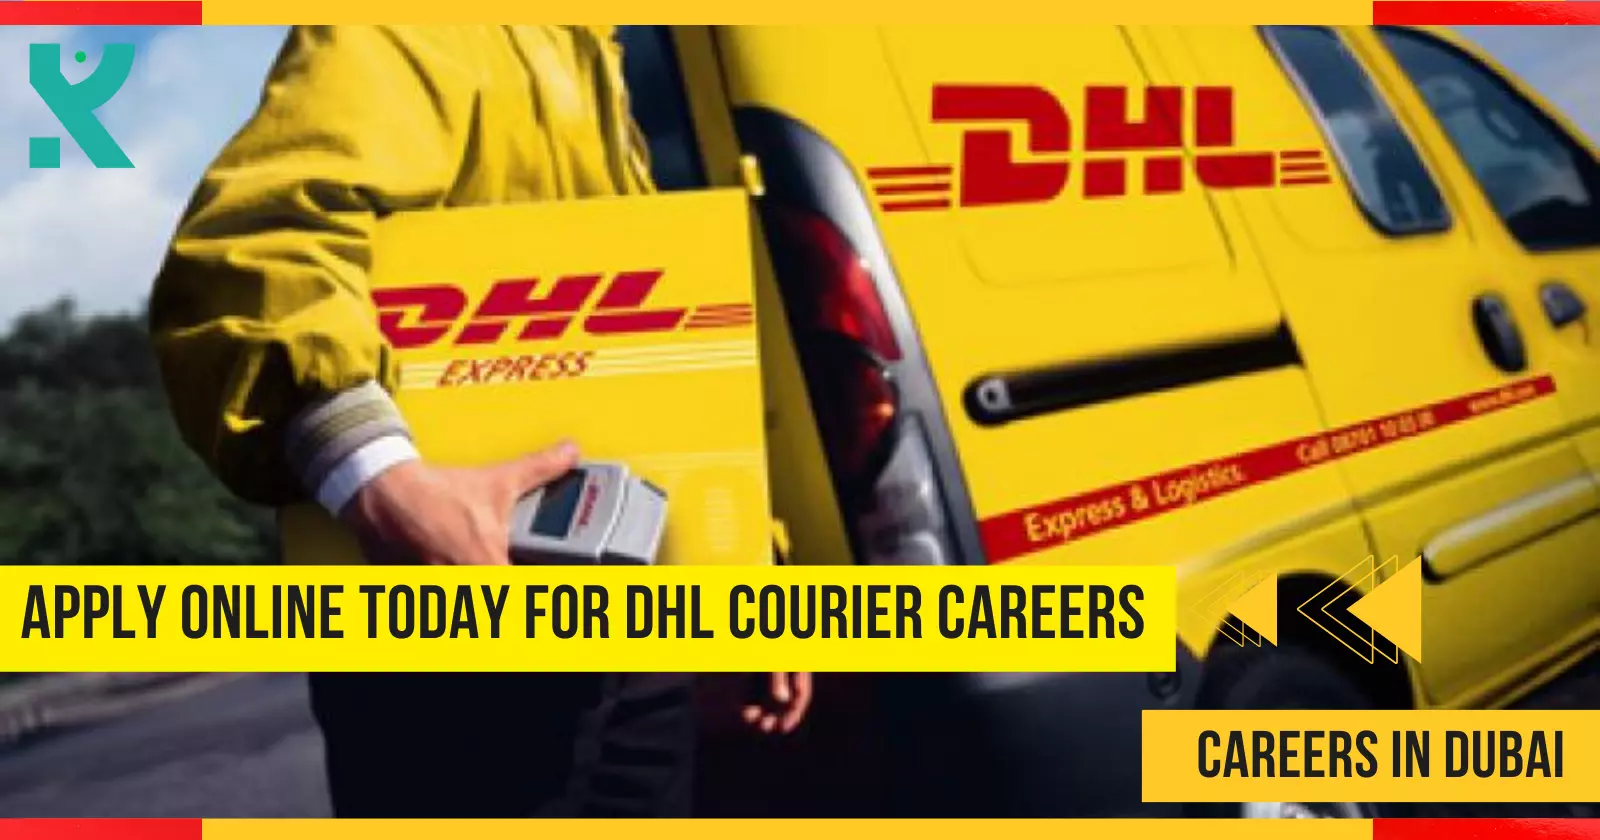 Apply Online Today for DHL Courier Careers